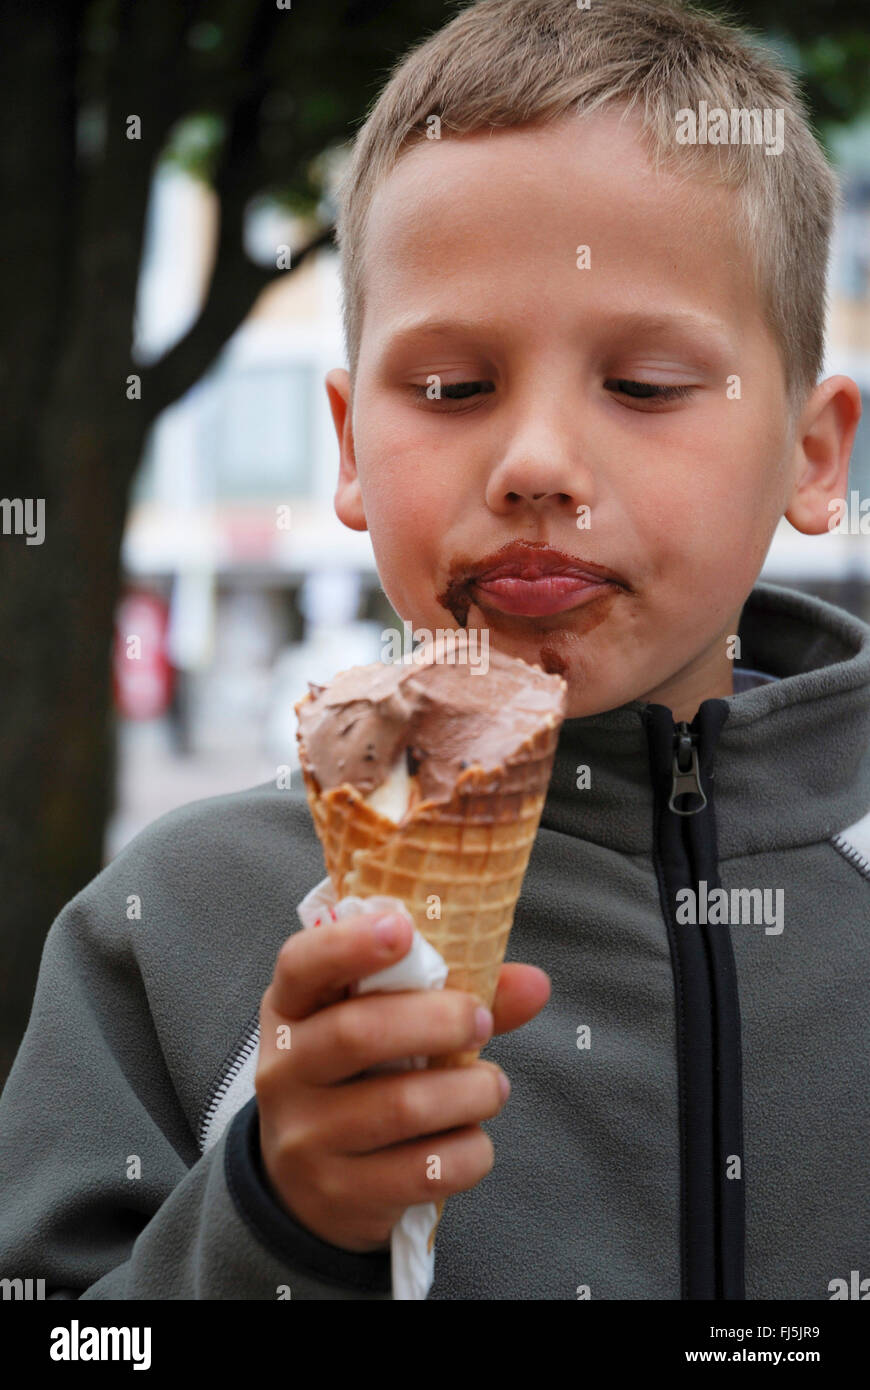 little boy with smeared face eating with pleasure a chocolate ice cream, portrait of a child, Germany Stock Photo